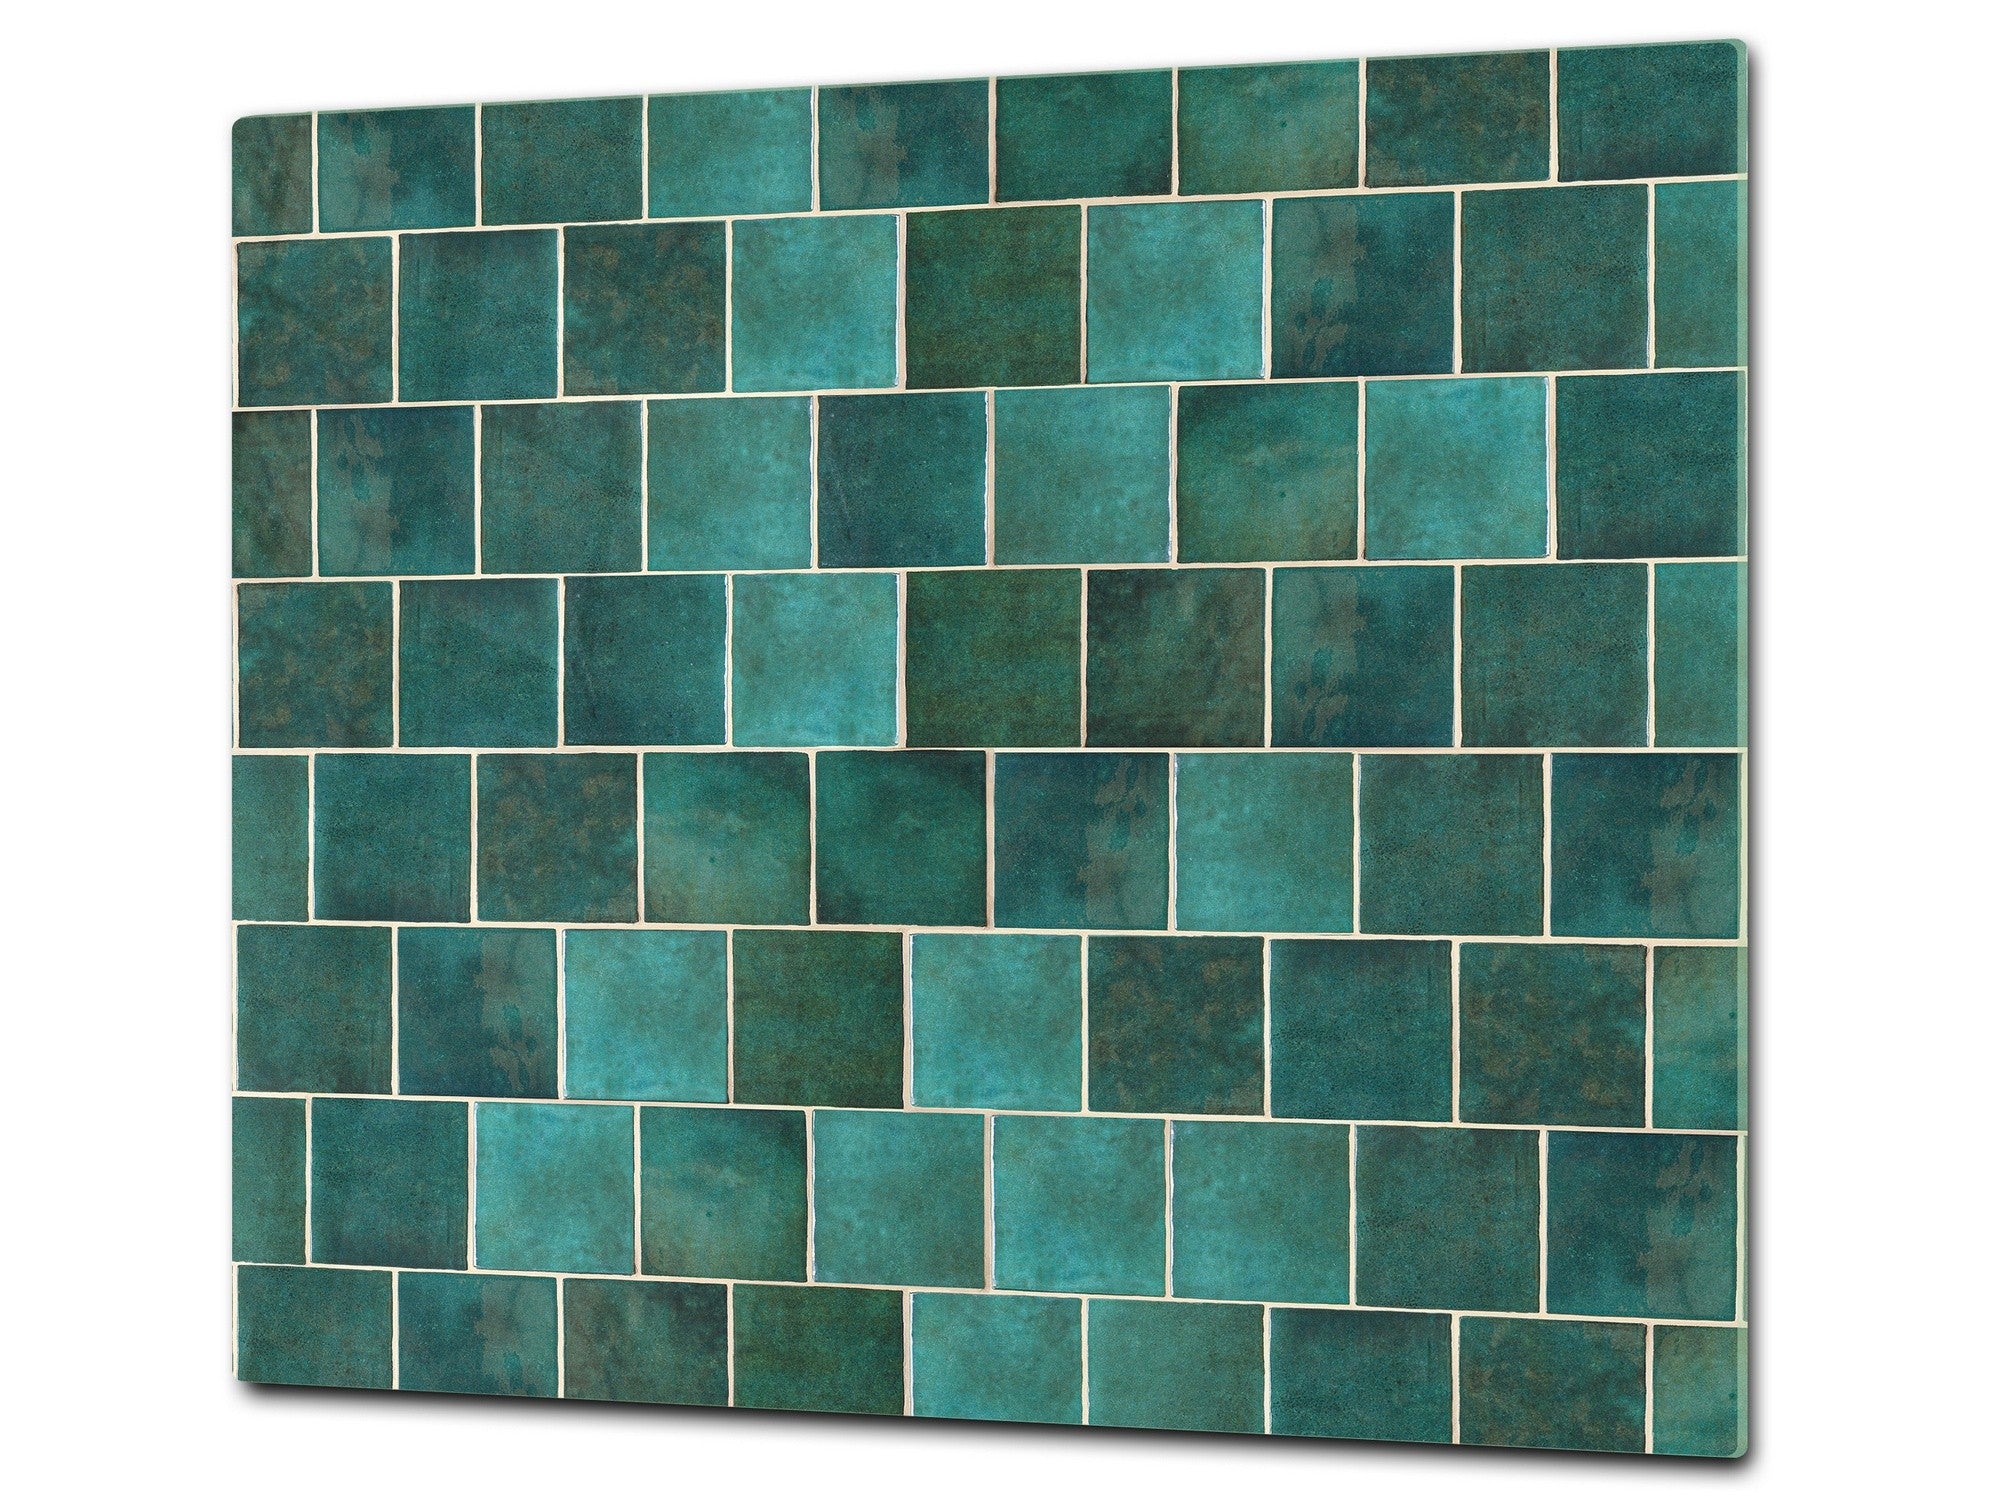 KITCHEN Board & Induction Cooktop Cover Glass Pastry Board D25 Textures and  Tiles 1 Series: Green Vintage Ceramic Tiles 1 